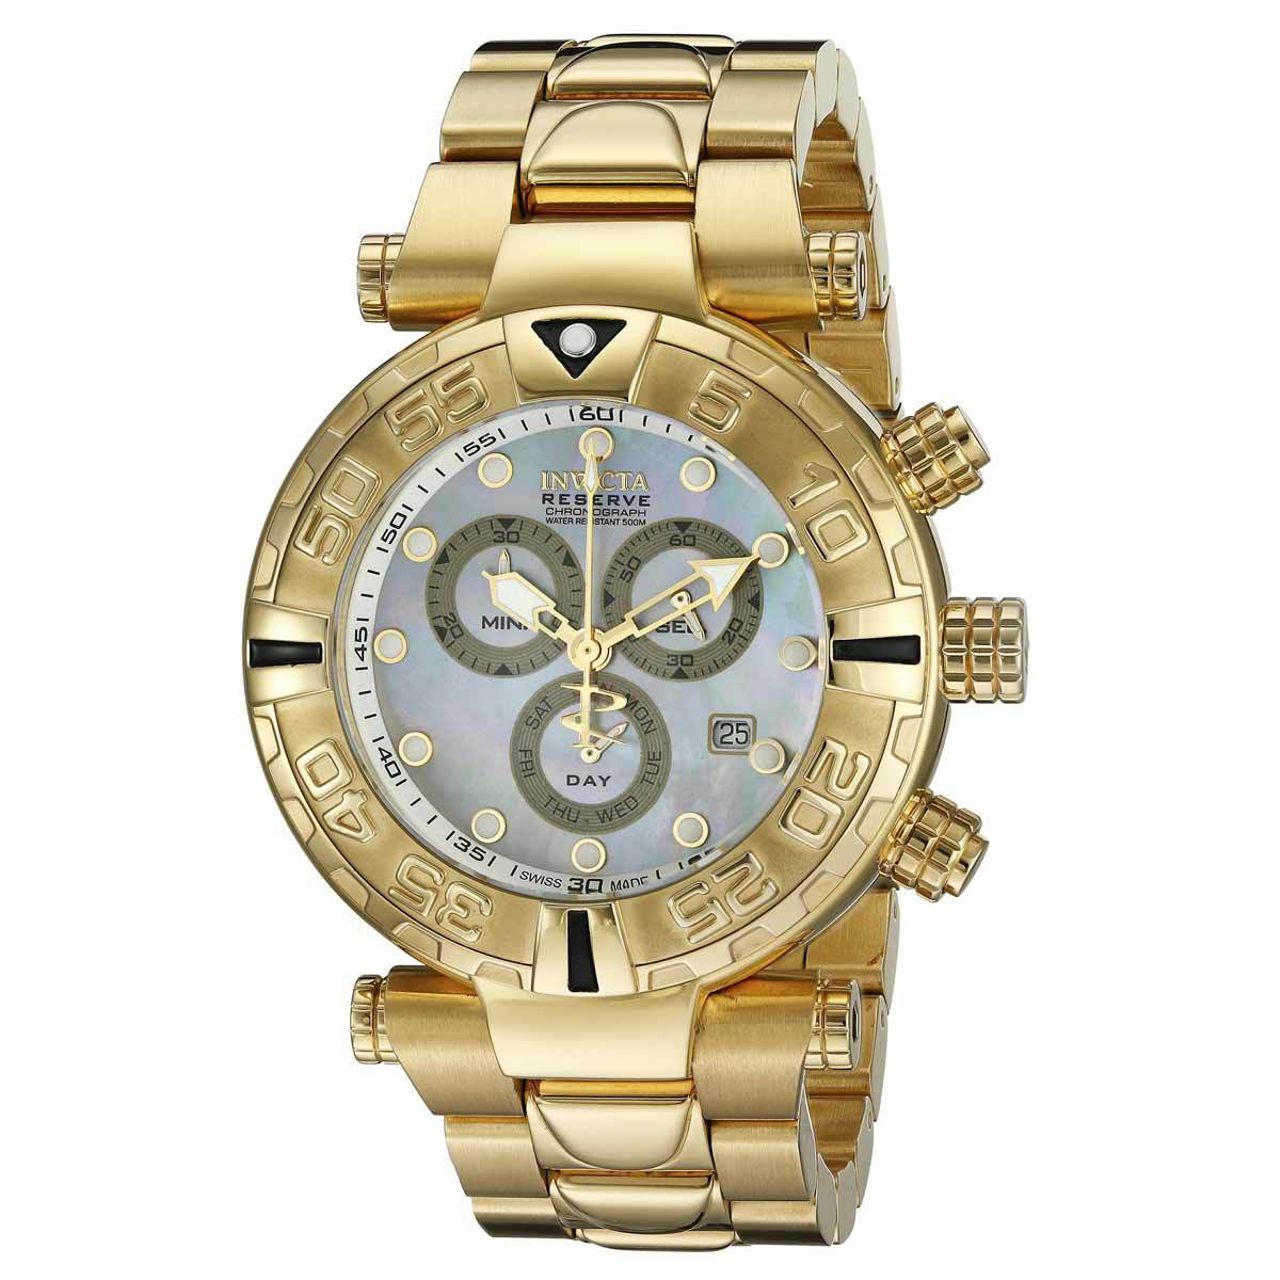 Invicta 17684 Mens Quartz Watch with Stainless Steel Strap